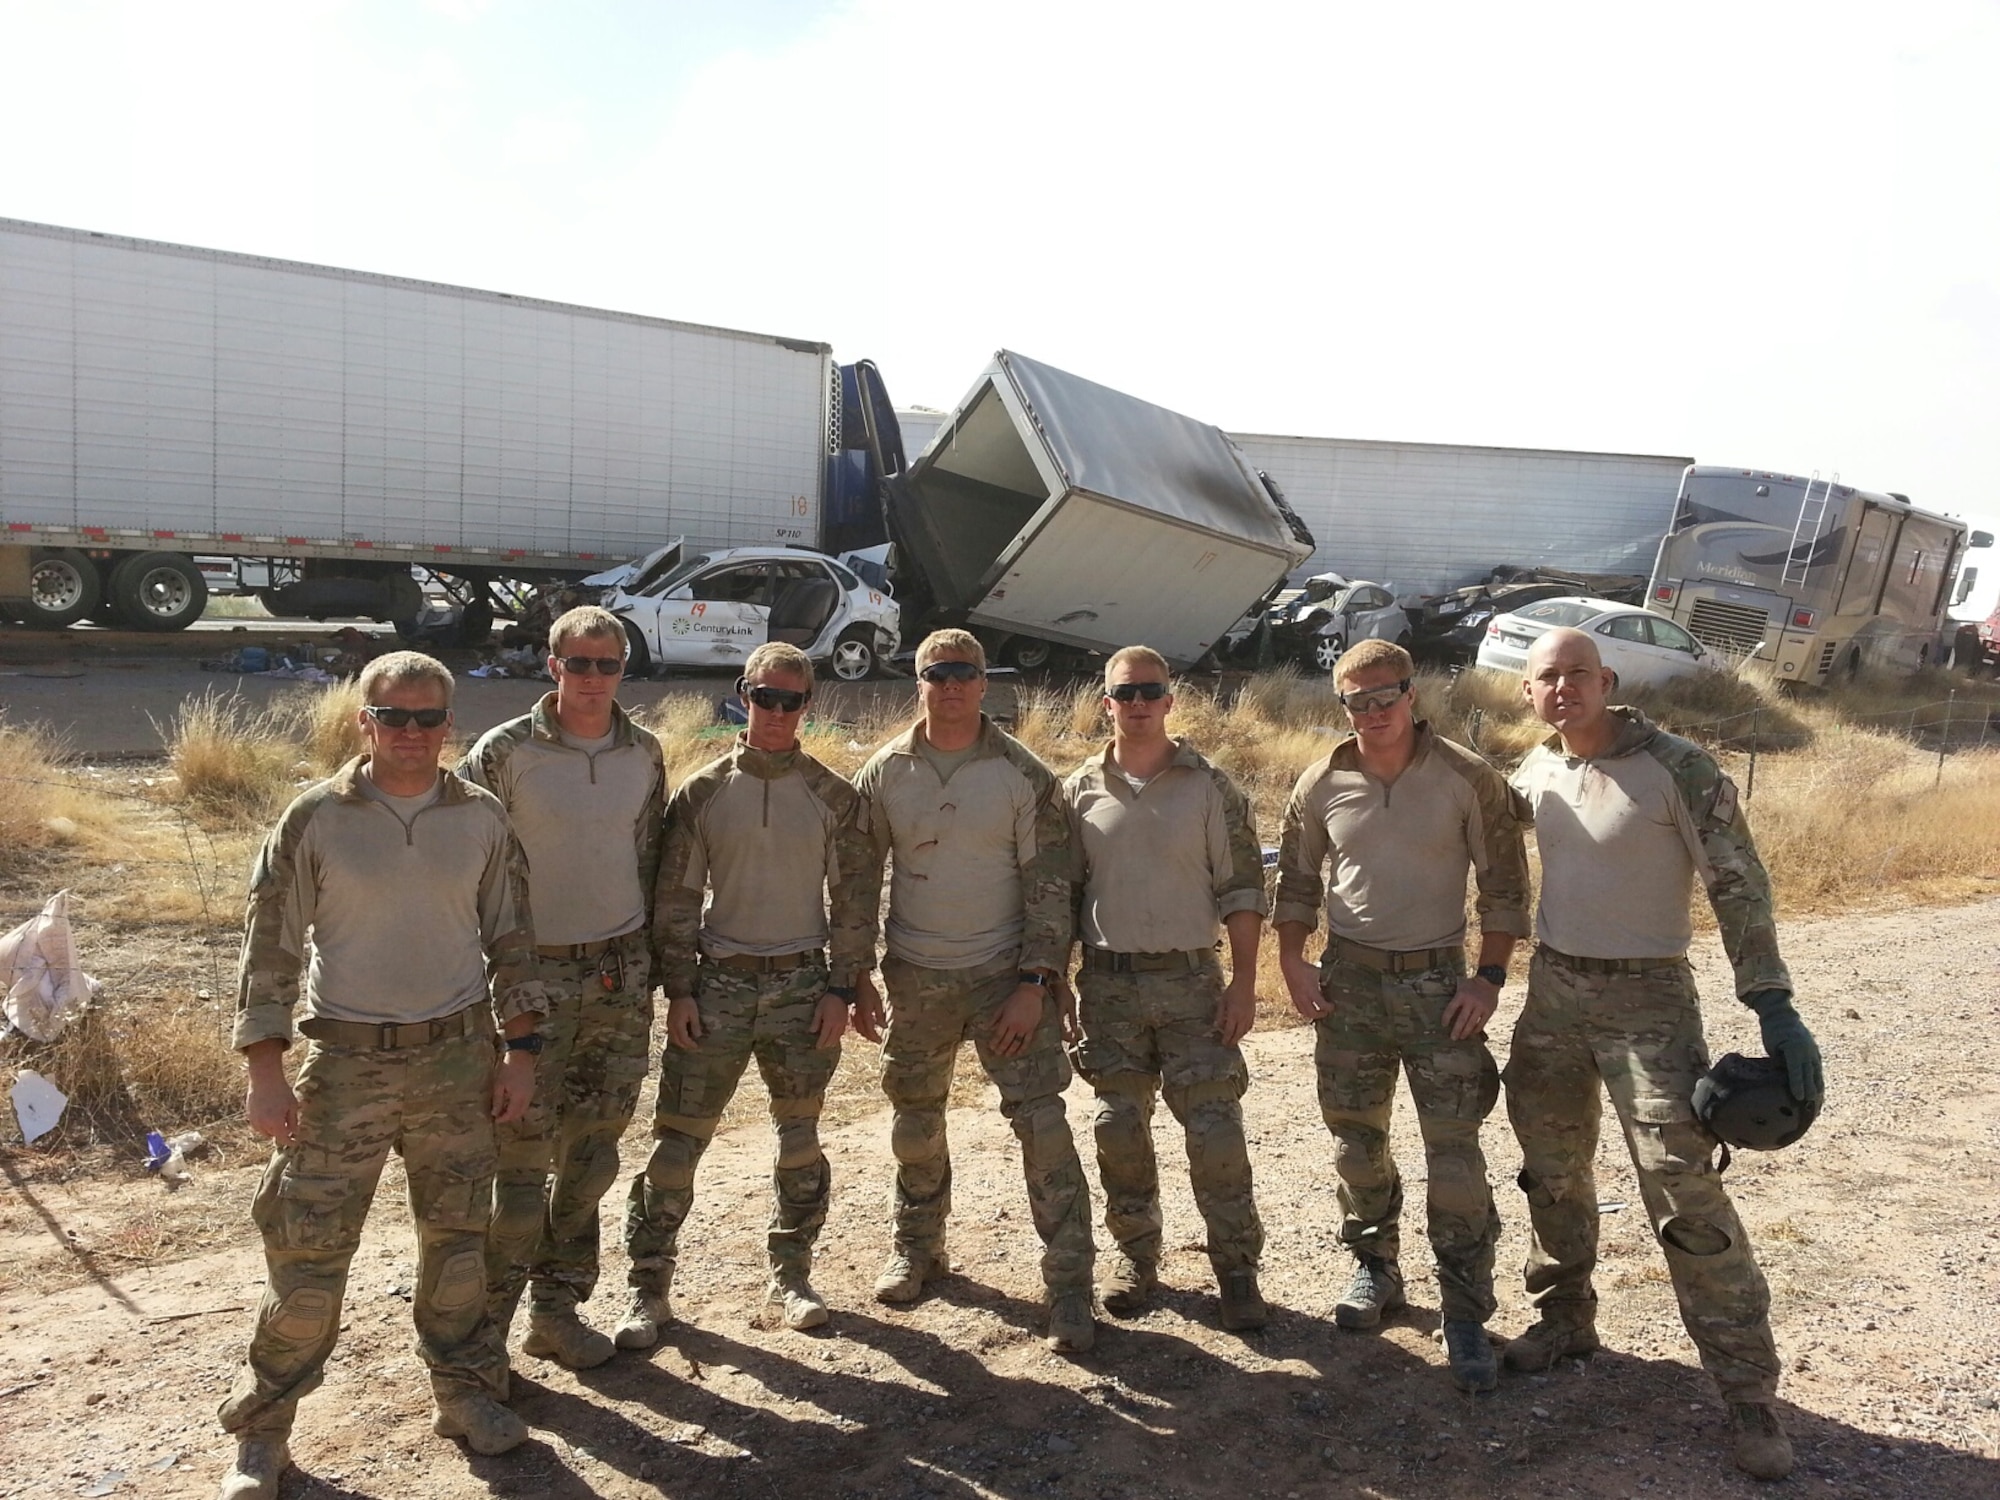 Airmen from the 48th Rescue Squadron at Davis-Monthan Air Force Base, Ariz., stand by a 19 vehicle accident on Interstate 10 near Picacho Peak, Ariz., Oct. 29, 2013. The Airmen extracted five people from vehicles, coordinated four medical helicopter flights, and organized ground transportation for about six injured individuals.